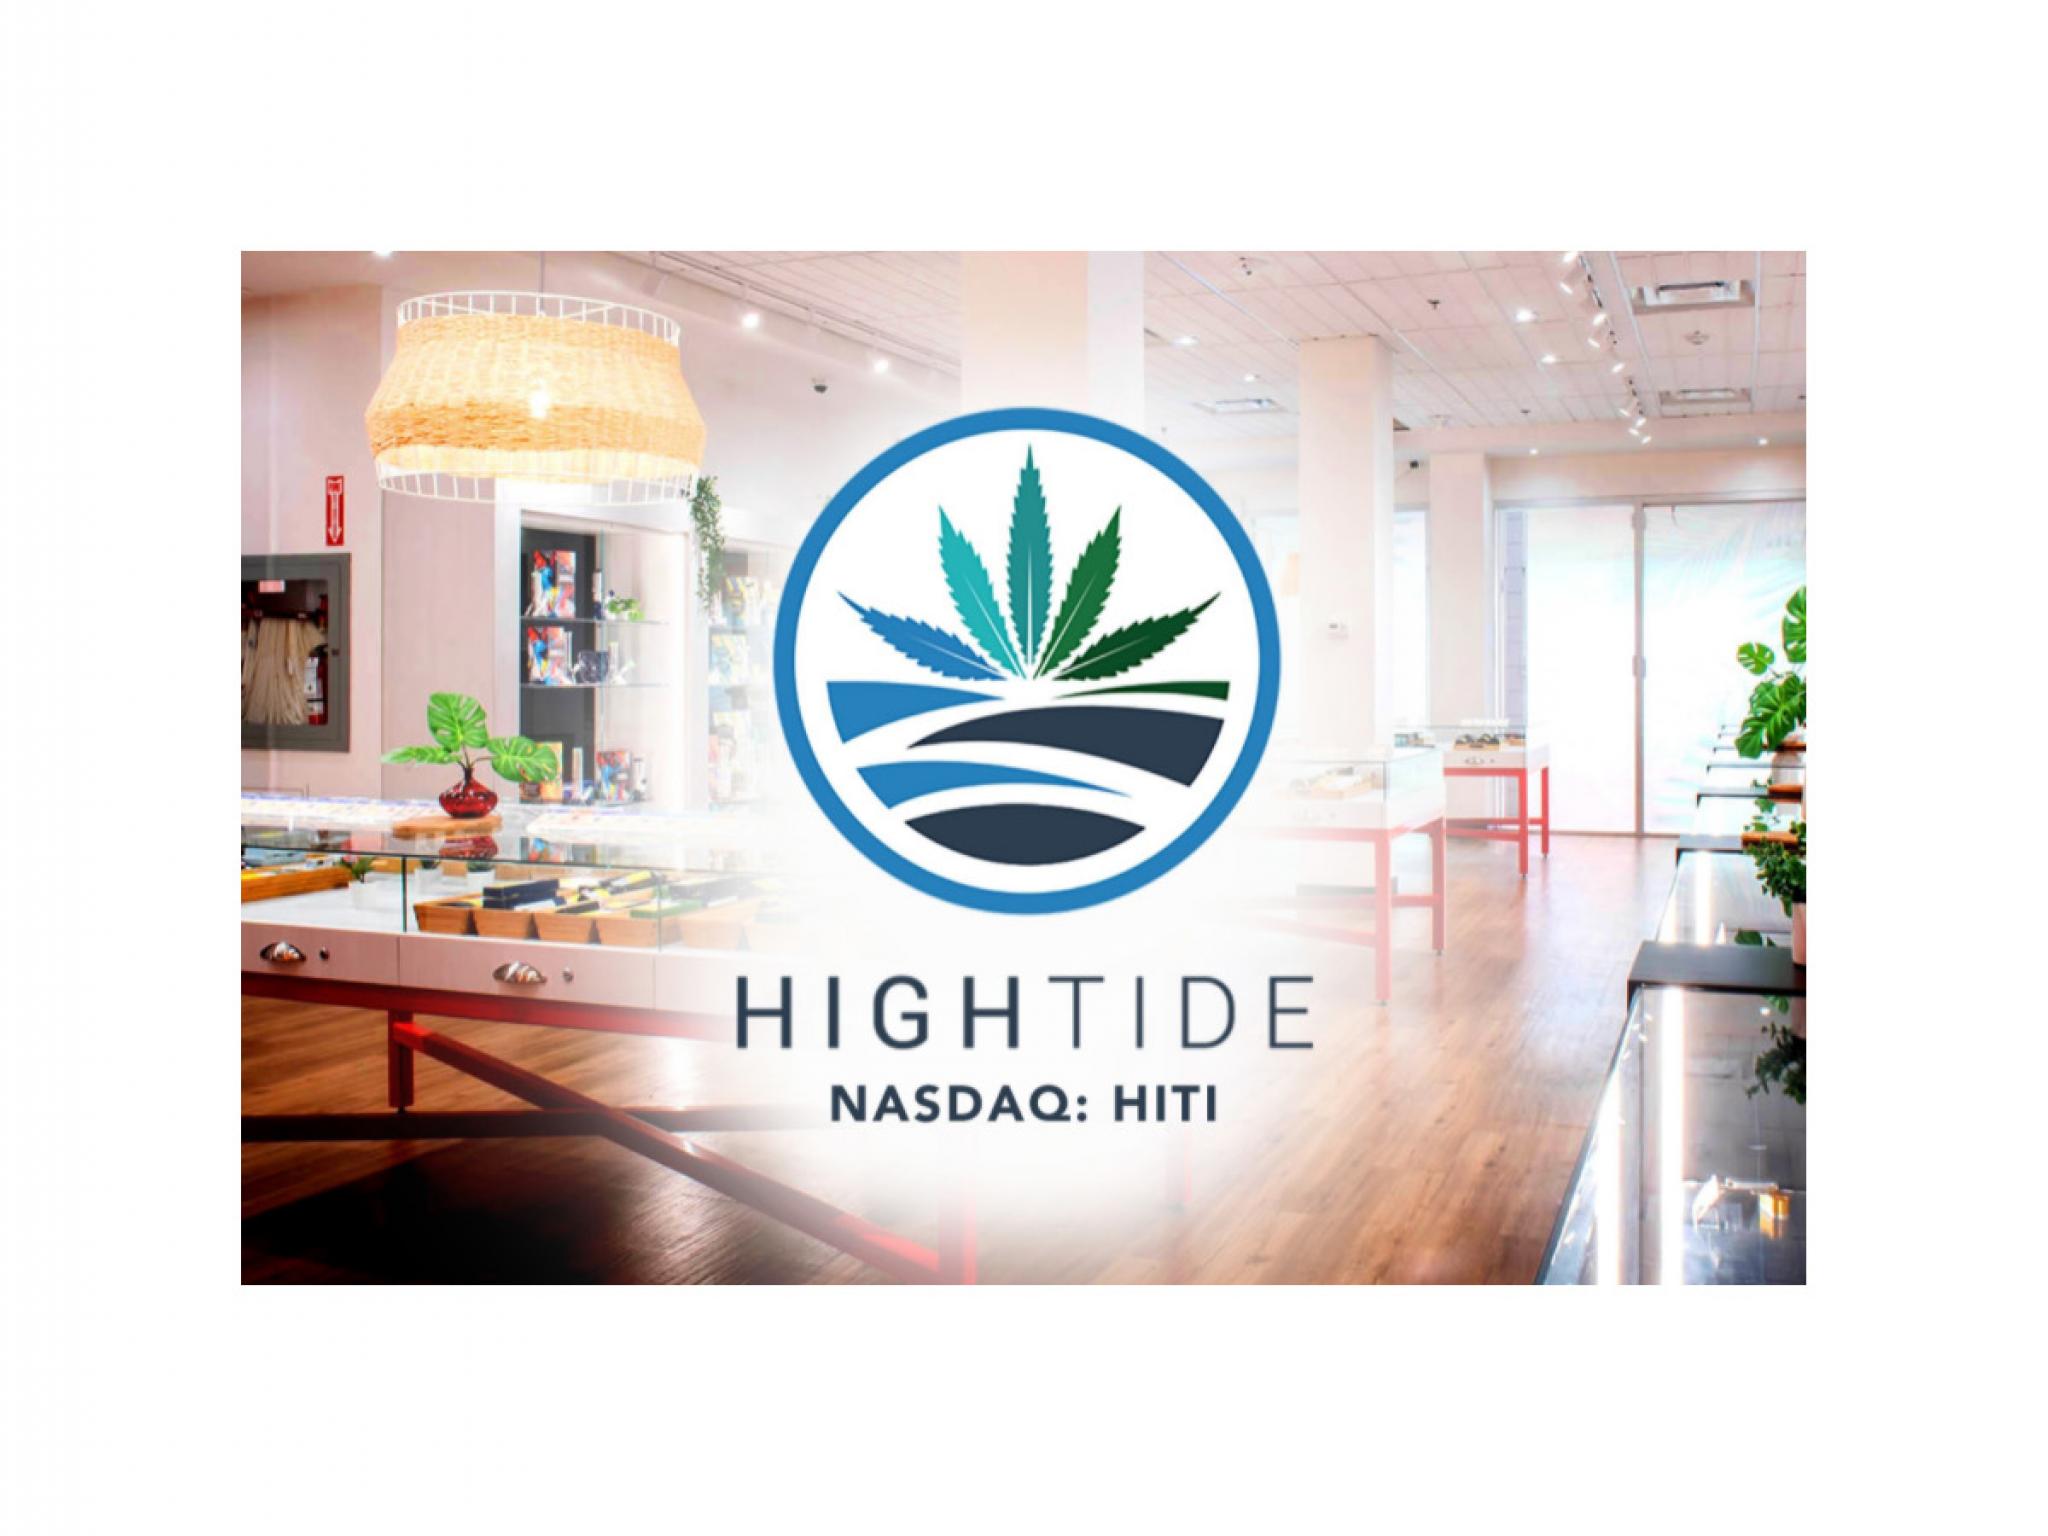  high-tide-cannabis-shares-down-after-sale-of-its-kushbar-retail-assets-to-halo-collective-high-tide-seeking-more-cannabis-dispensaries 